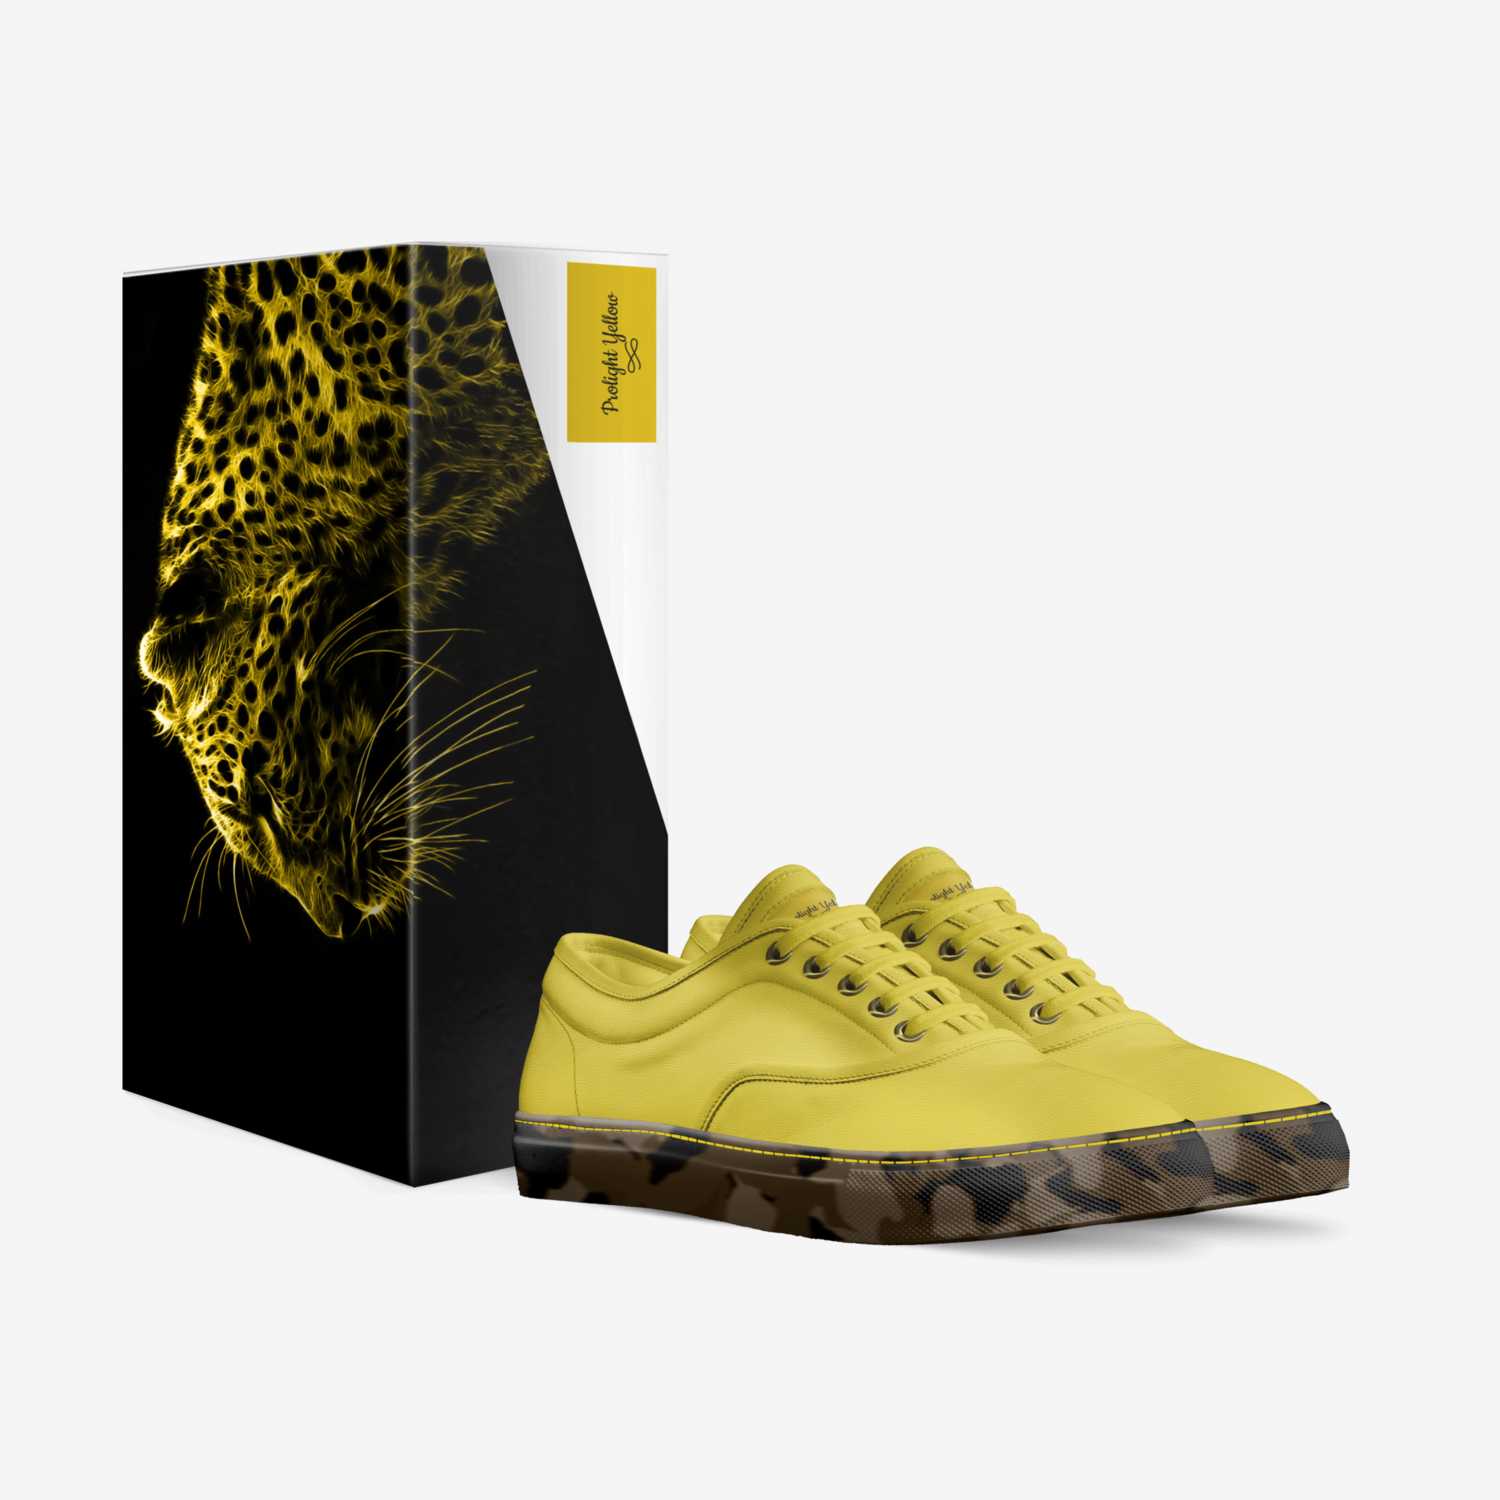 Prolight Yellow custom made in Italy shoes by Omar Njai | Box view